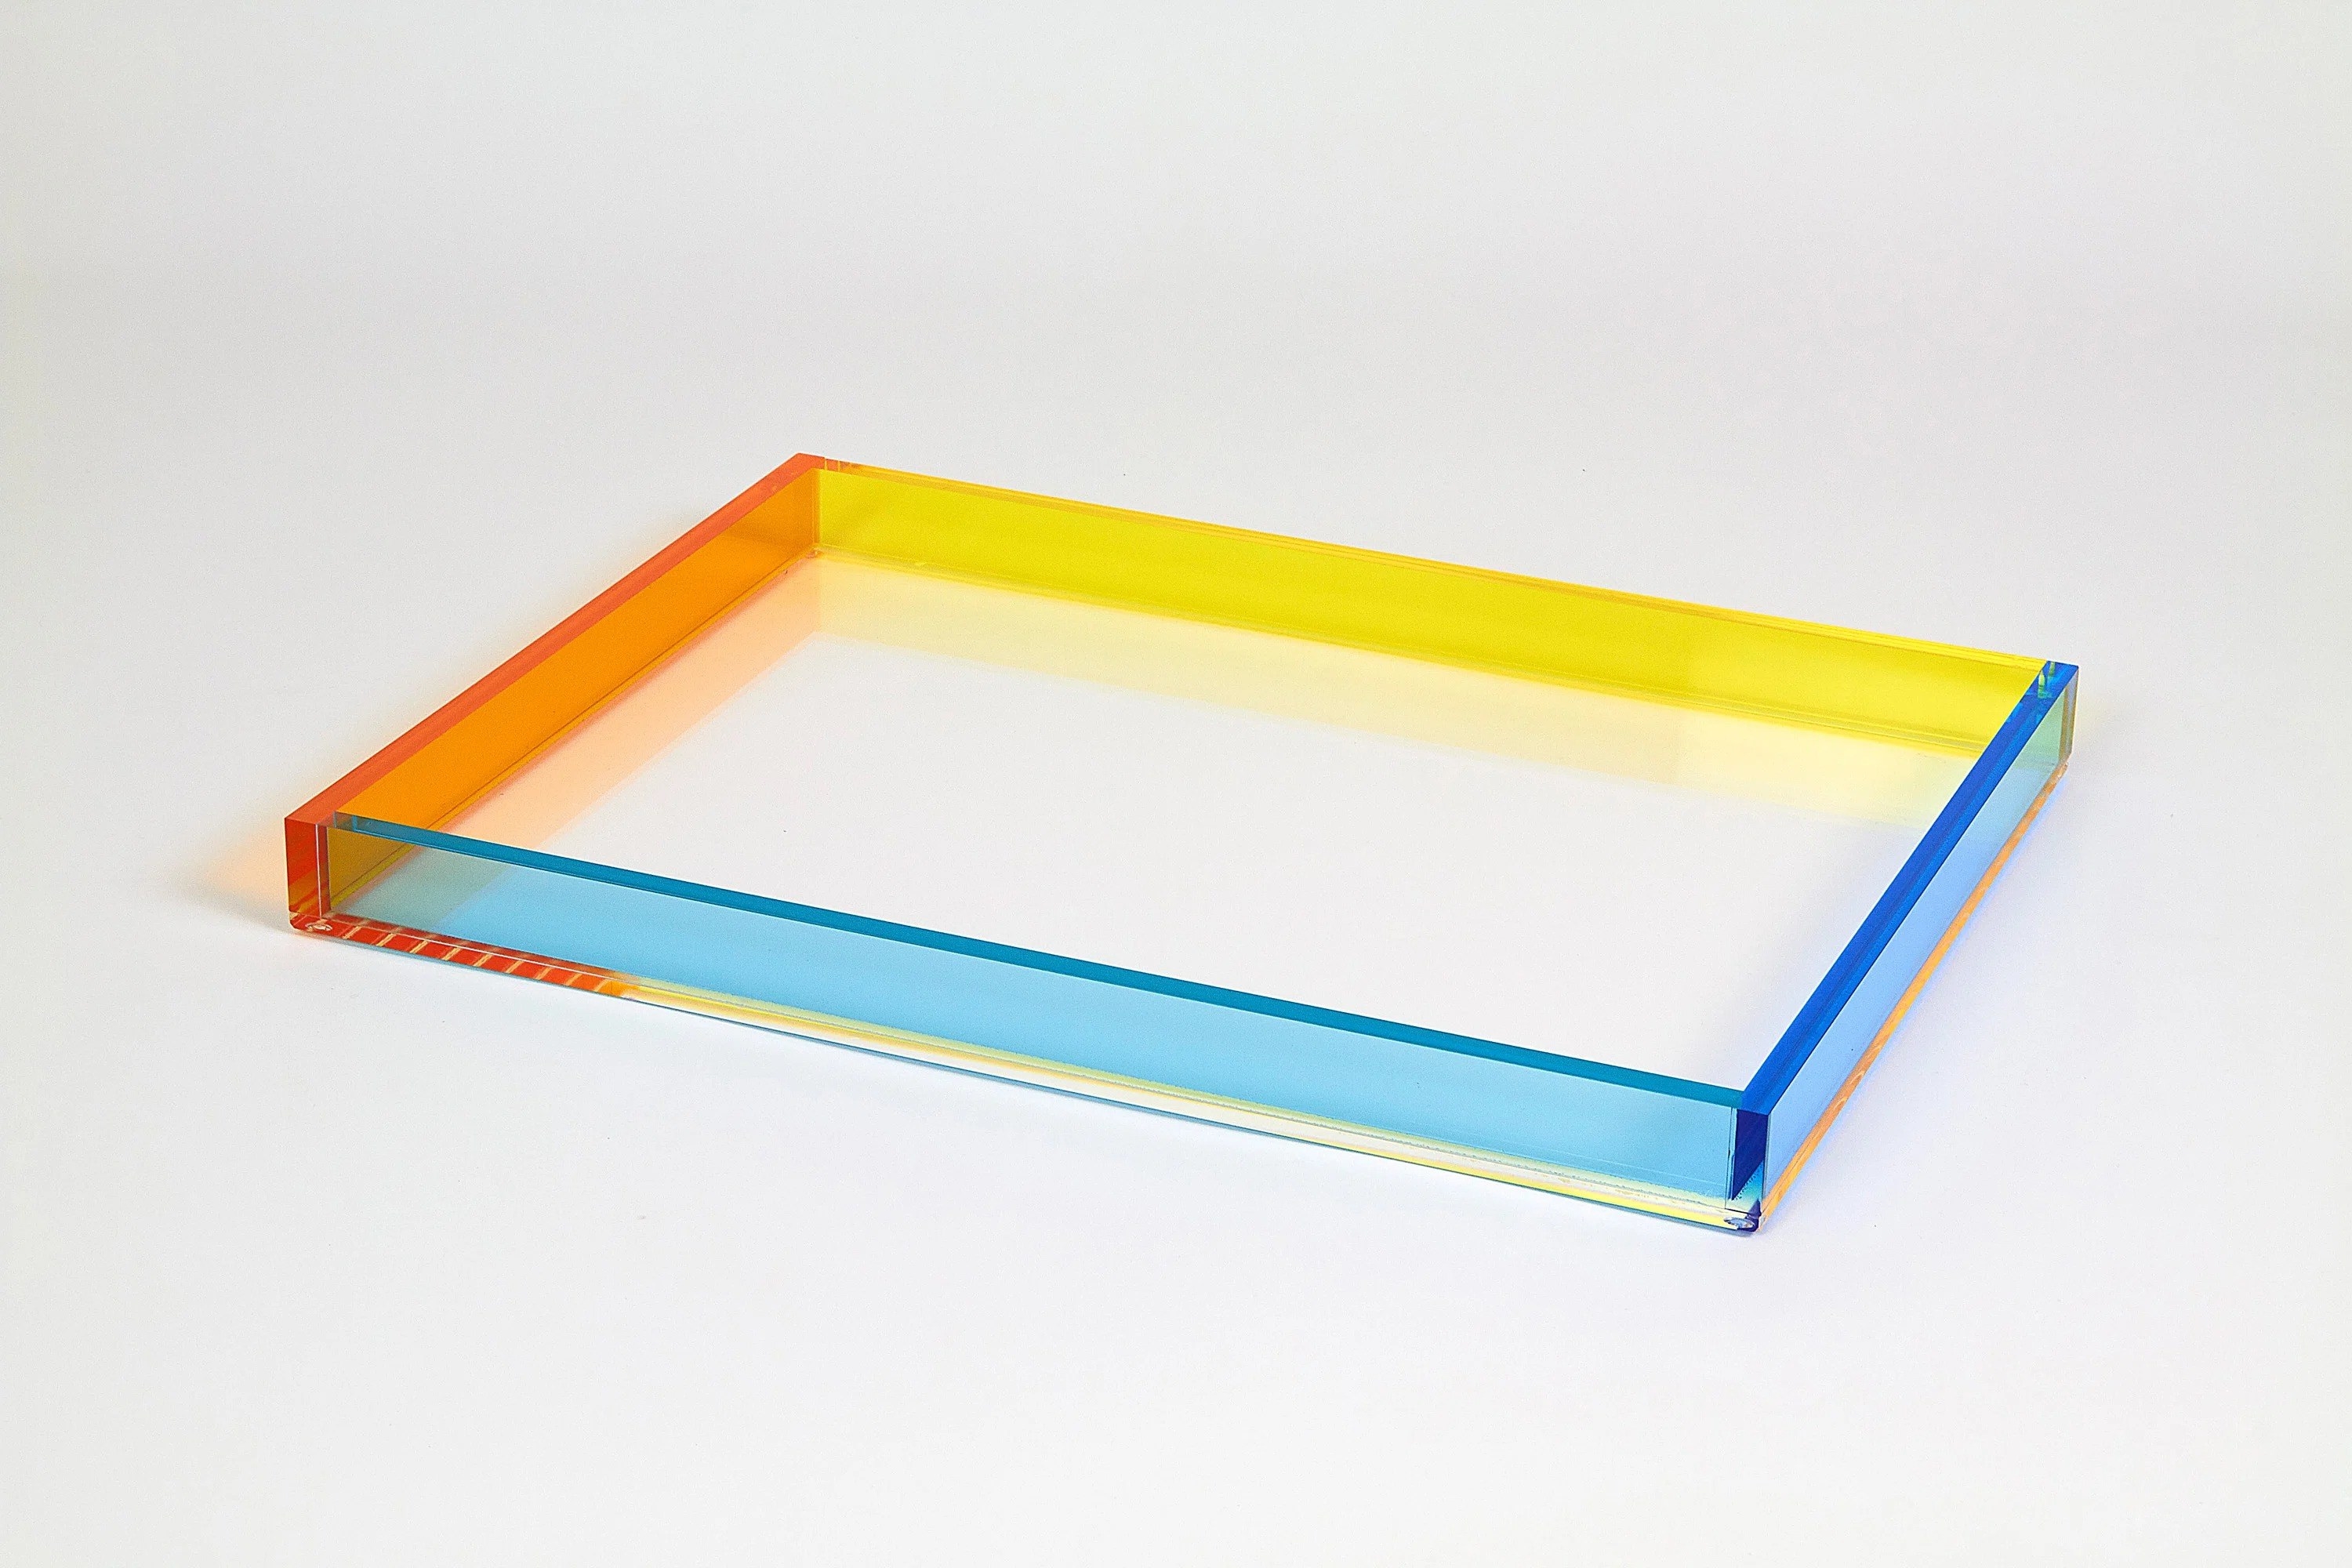 Transparent, rectangular tray with yellow, blue, and orange edges